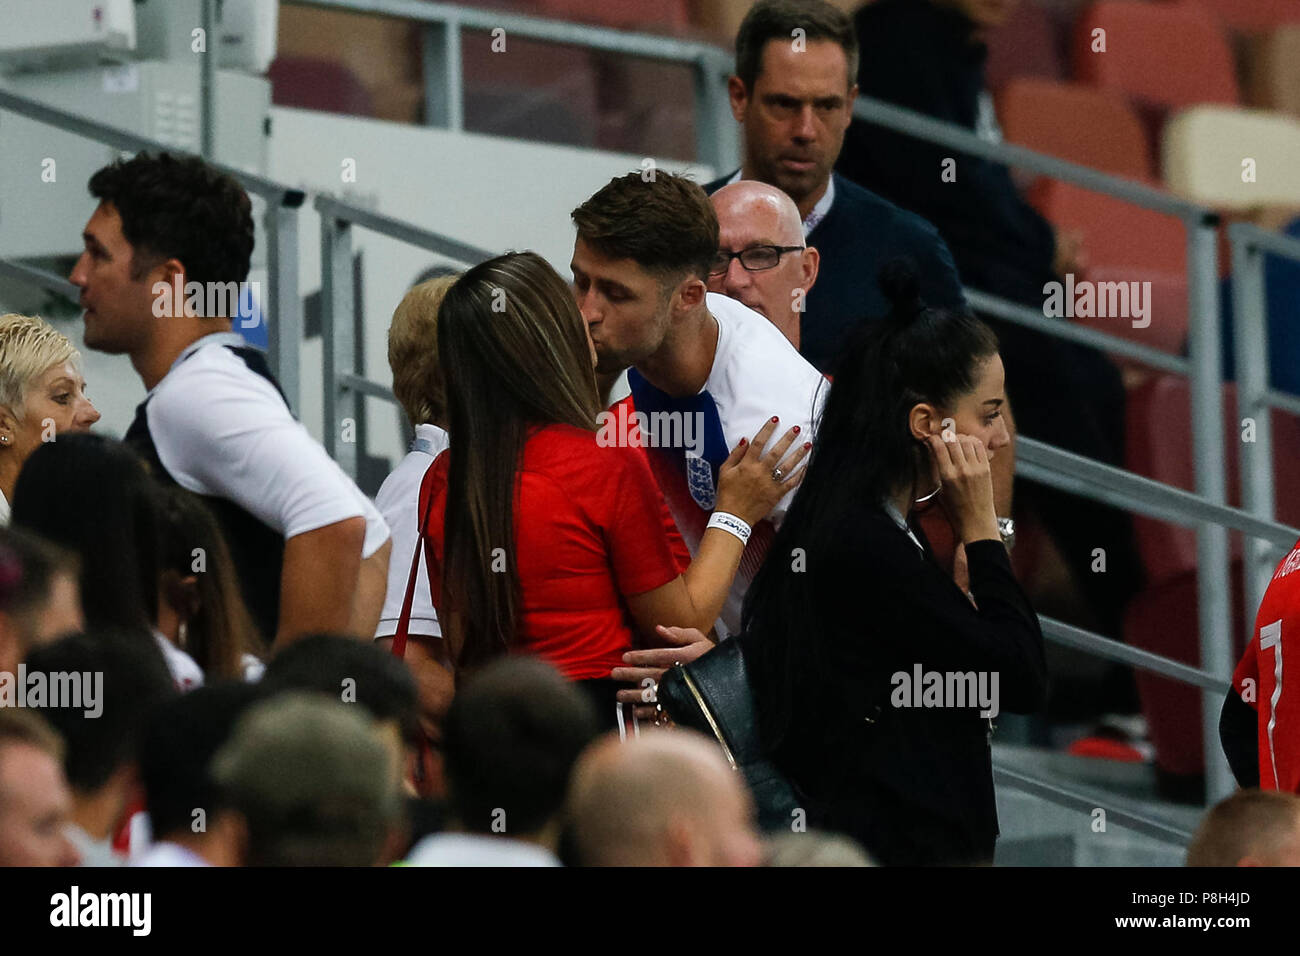 Moscow, Russia. 11th July 2018. Gary Cahill of England kisses Gemma Acton after the 2018 FIFA World Cup Semi Final match between Croatia and England at Luzhniki Stadium on July 11th 2018 in Moscow, Russia. (Photo by Daniel Chesterton/phcimages.com) Credit: PHC Images/Alamy Live News Stock Photo